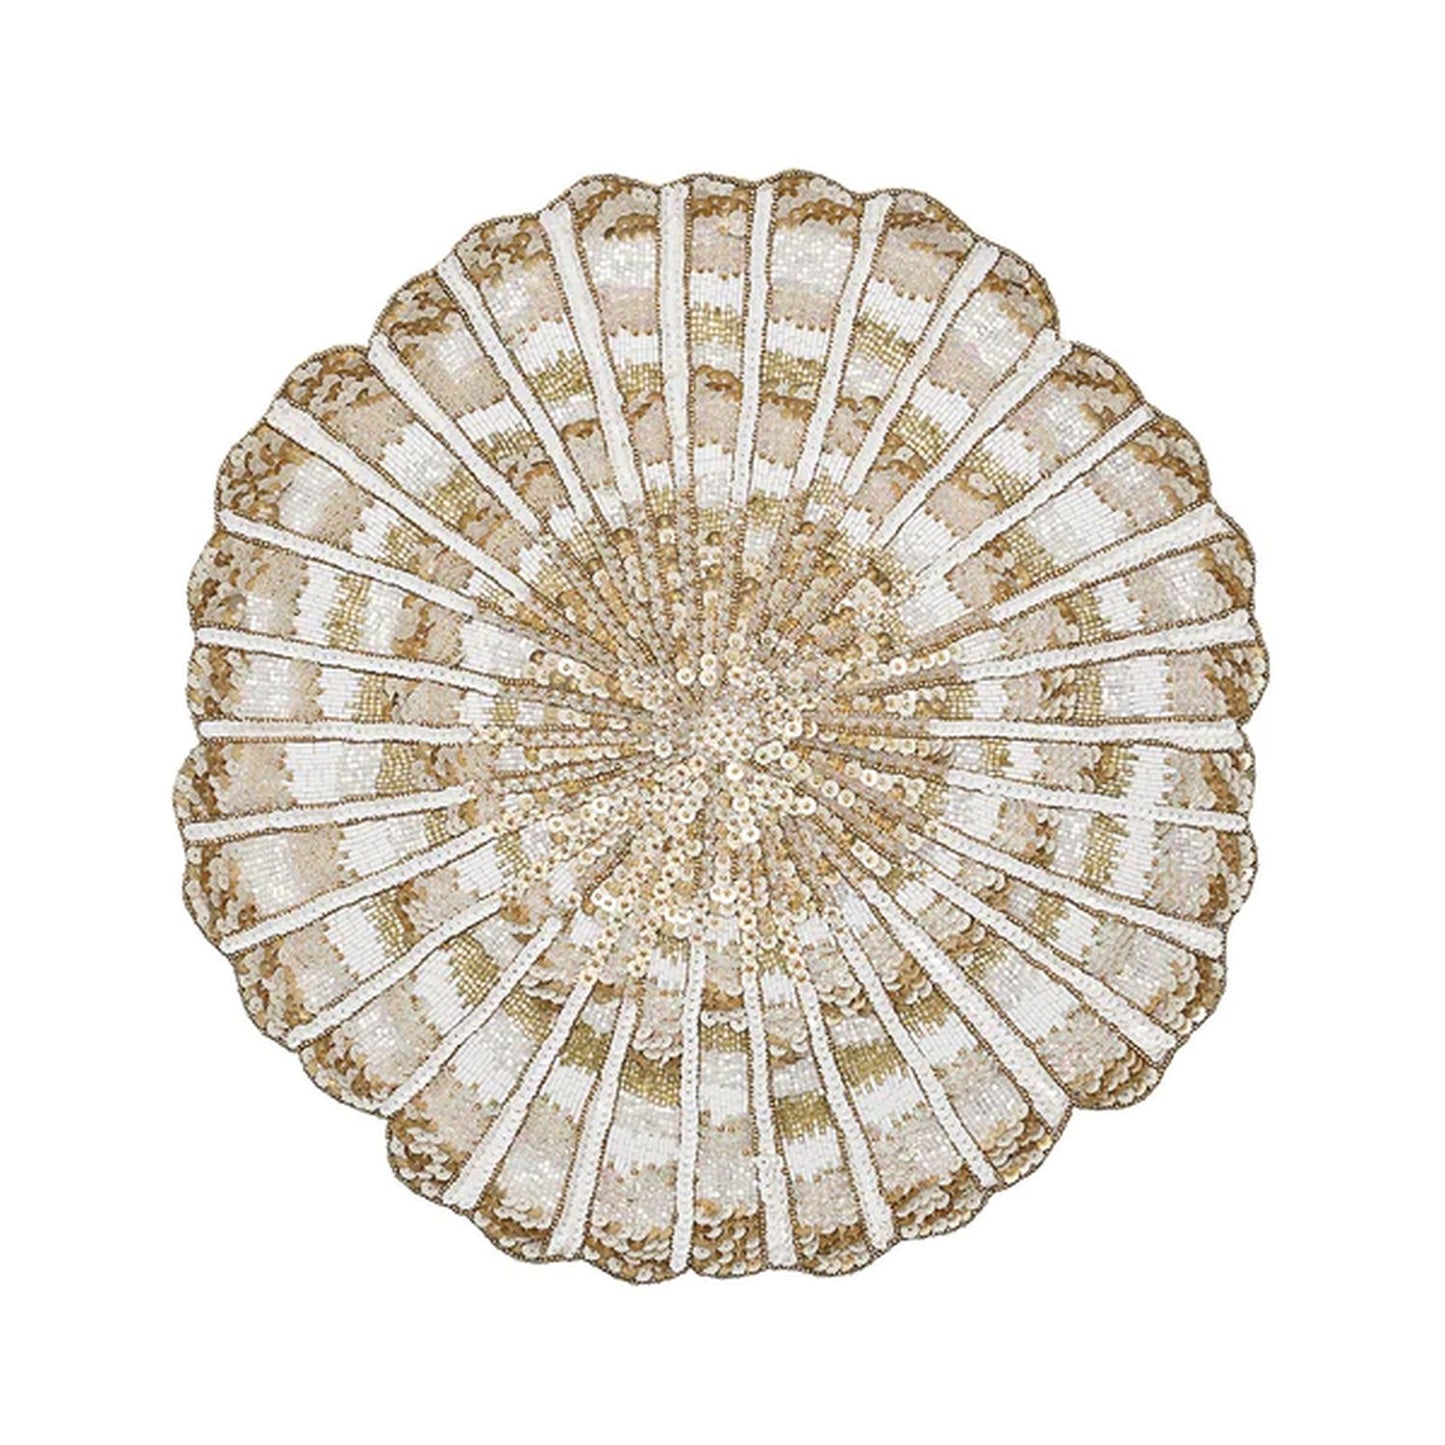 Kim Seybert Nautilus Placemat in Champagne & Gold, Set of 2